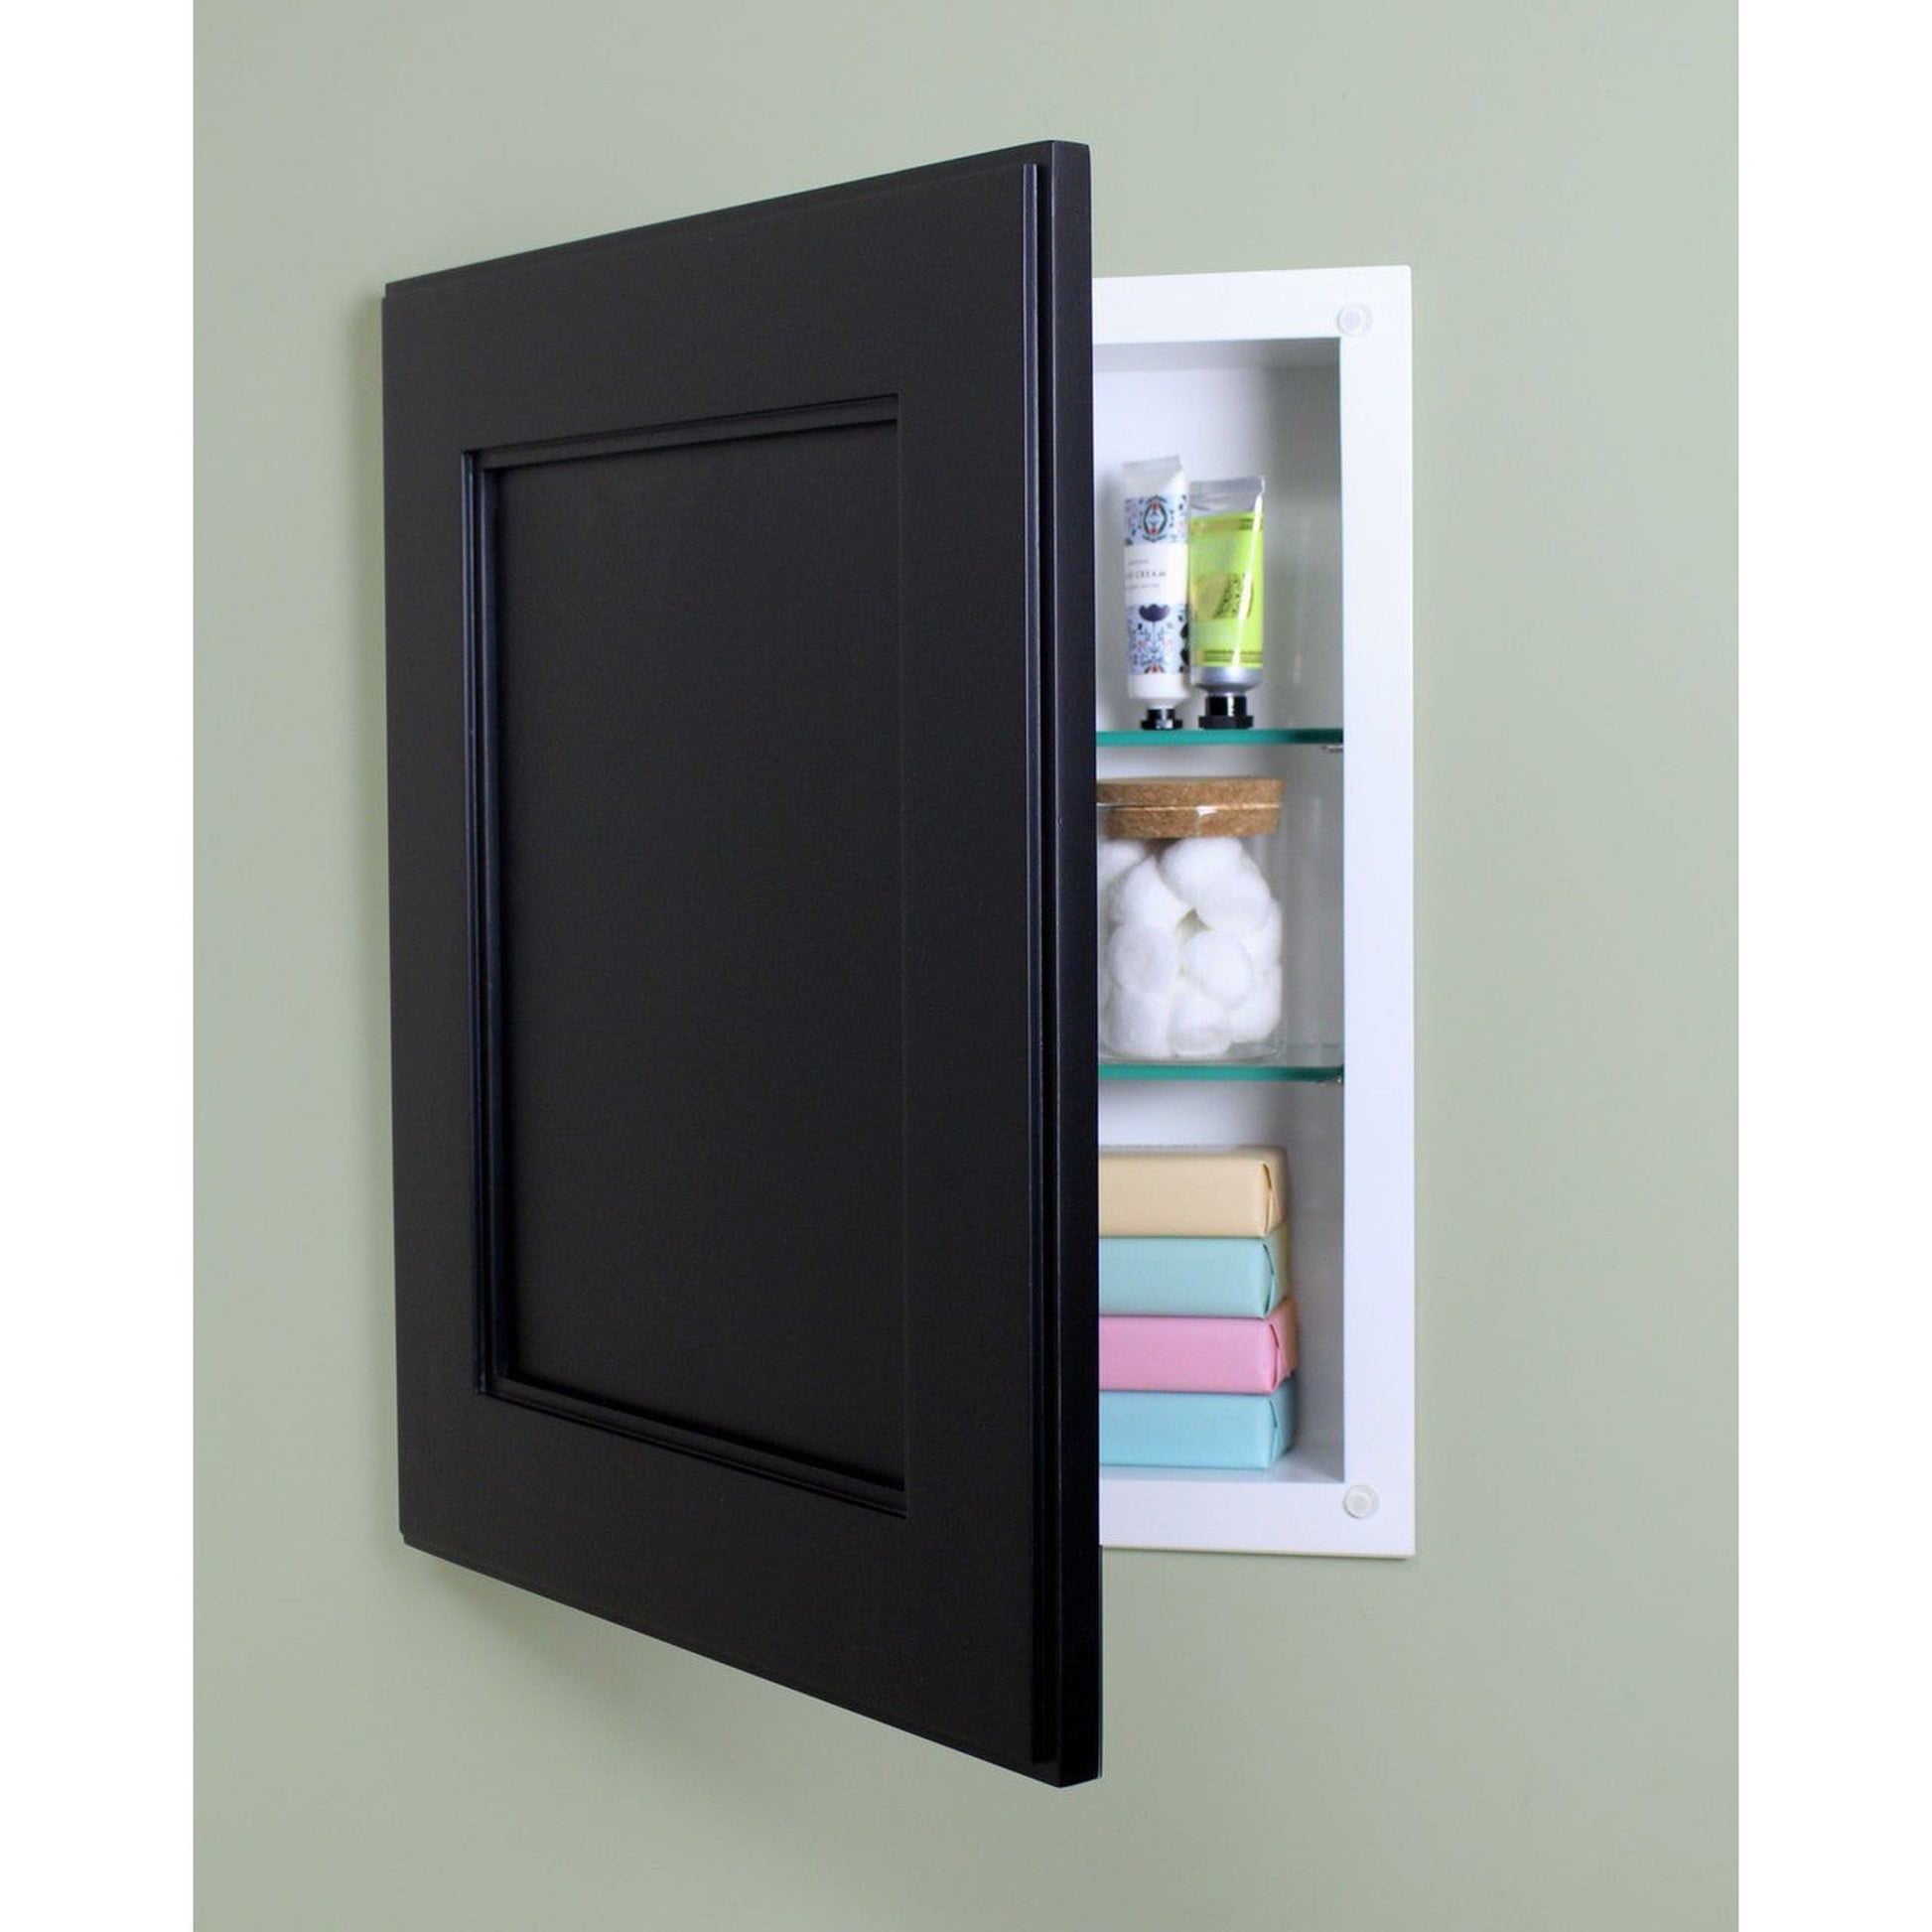 Fox Hollow Furnishings 14" x 18" Black Shaker Style Special 3" Depth White Interior Recessed Medicine Cabinet With Mirror